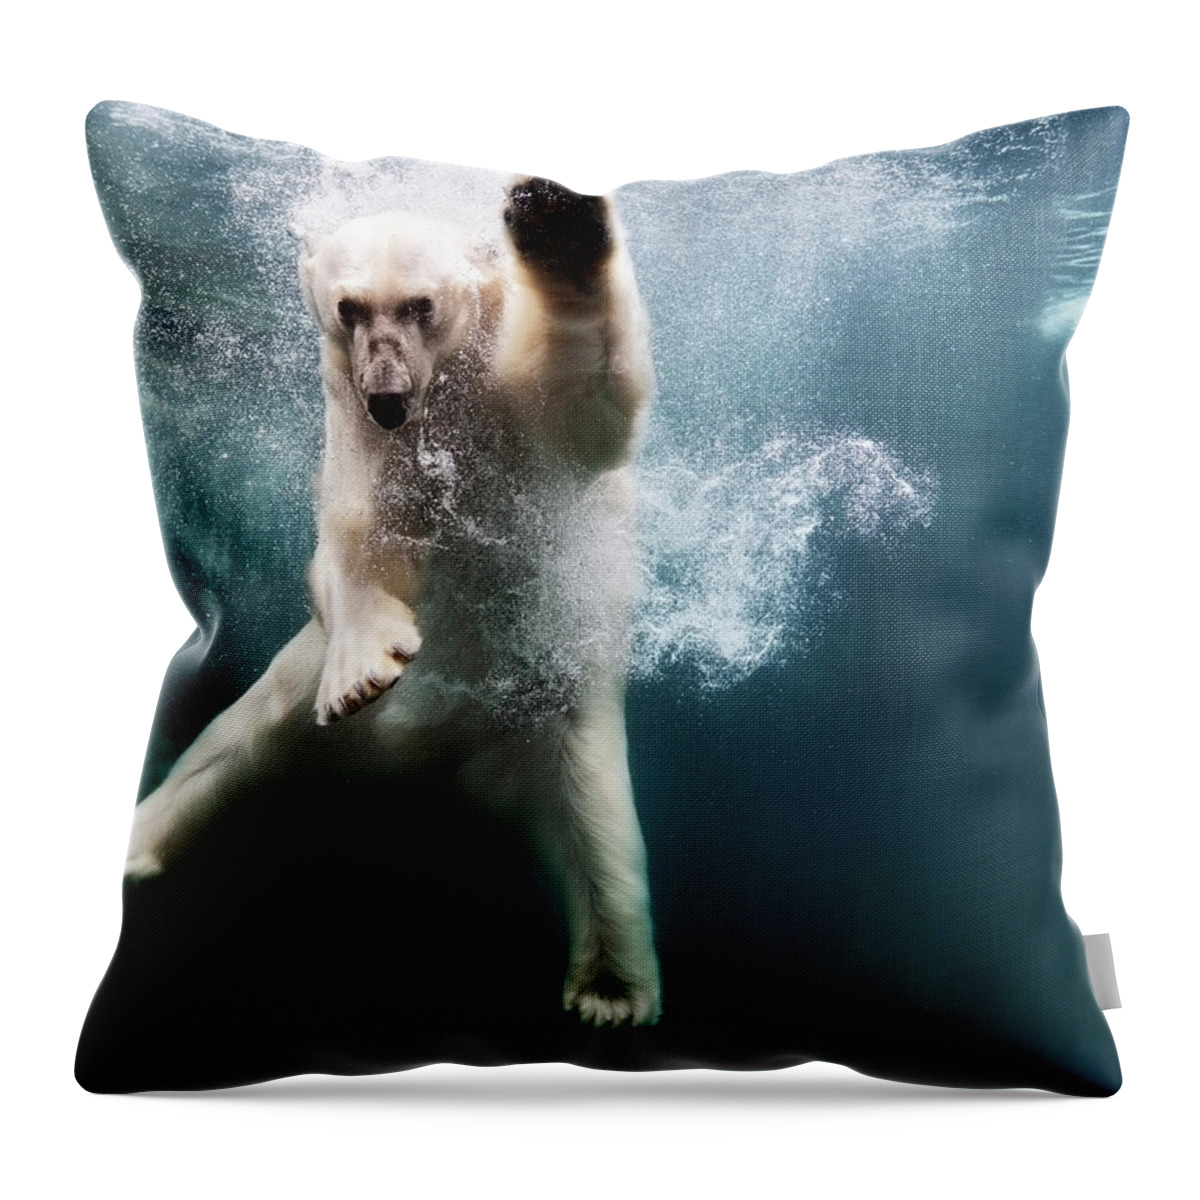 Diving Into Water Throw Pillow featuring the photograph Polarbear In Water by Henrik Sorensen